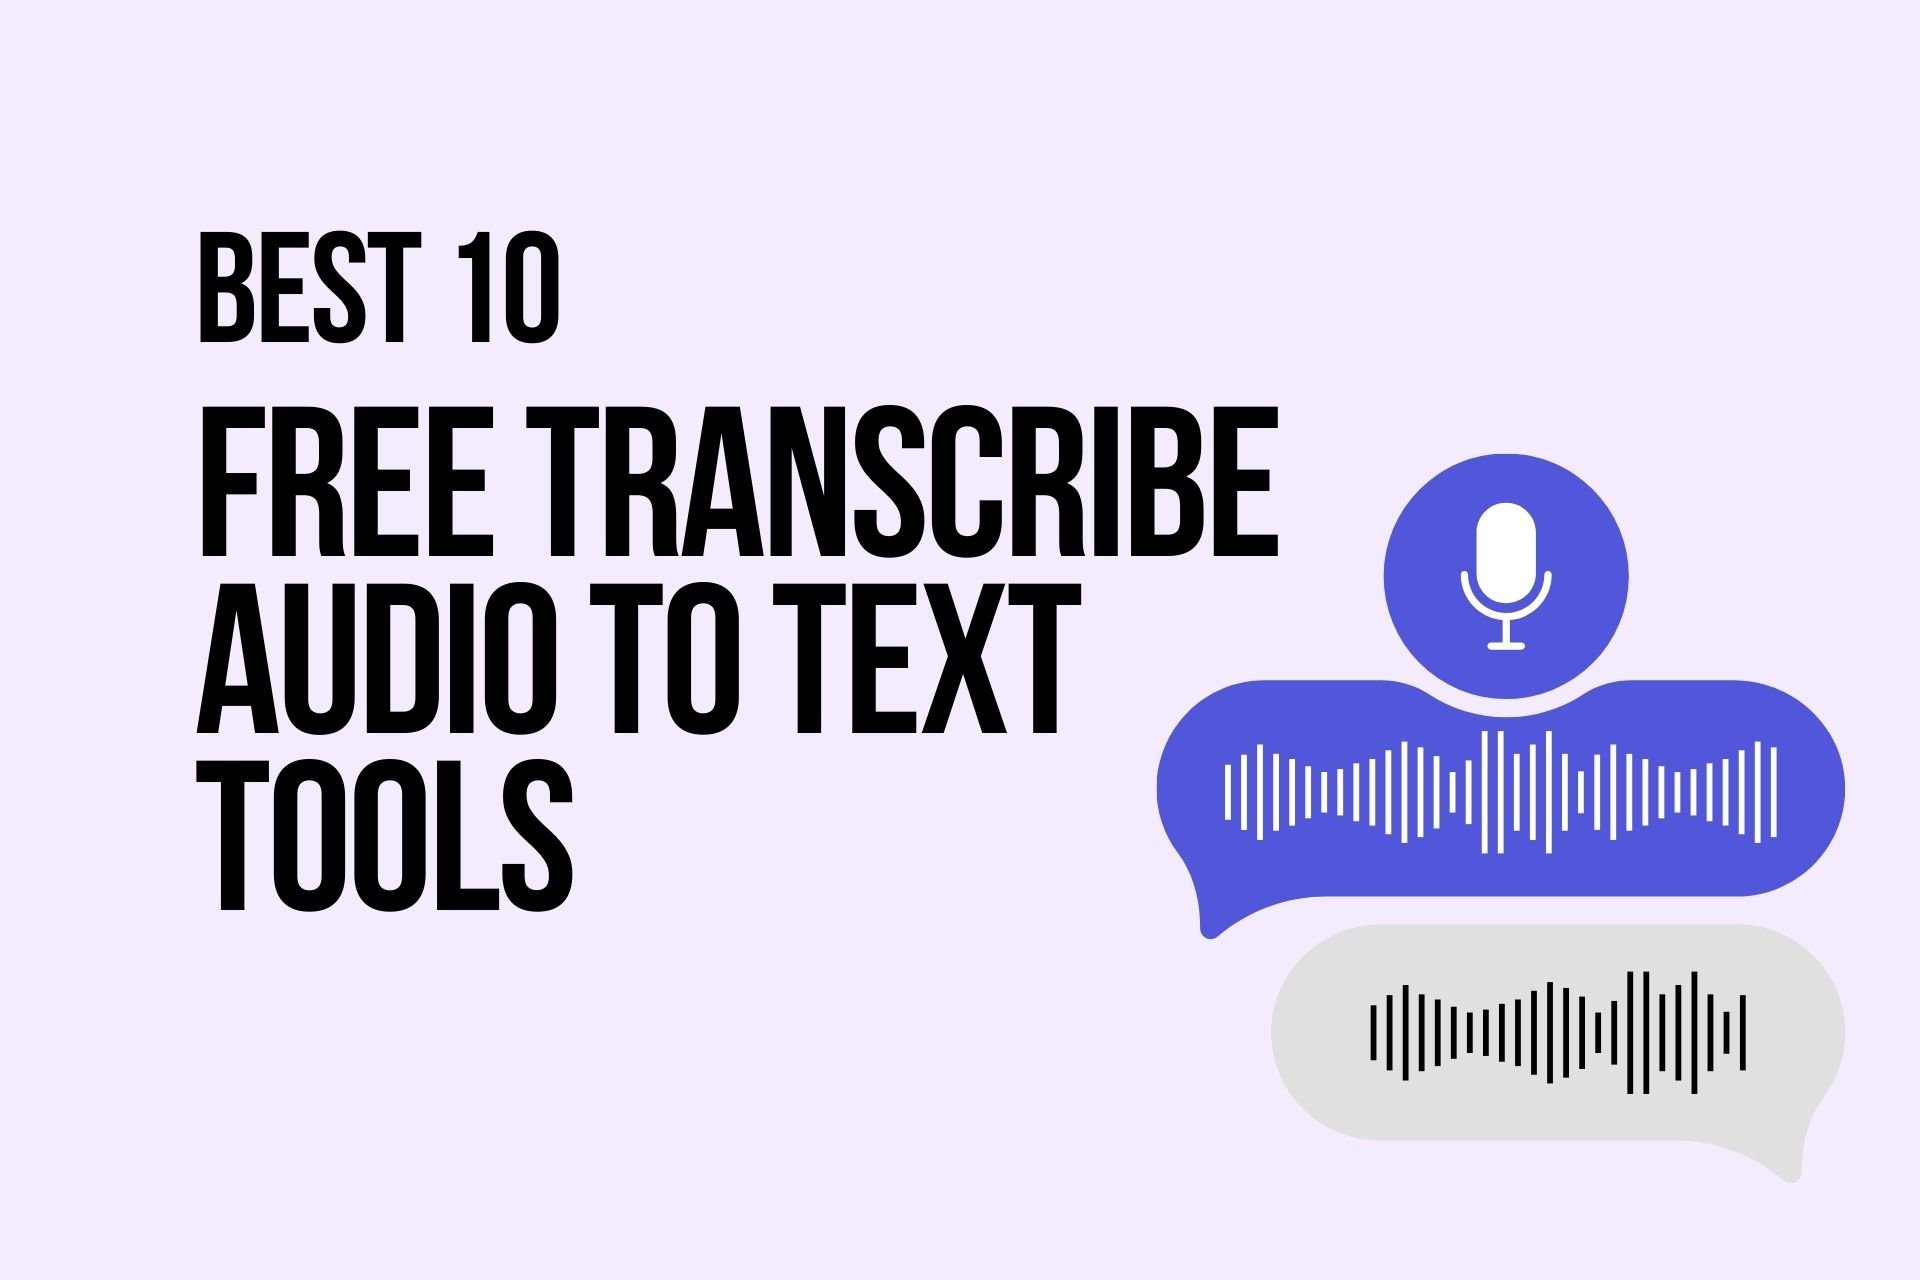 Best 10 Free Transcribe Audio to Text Tools